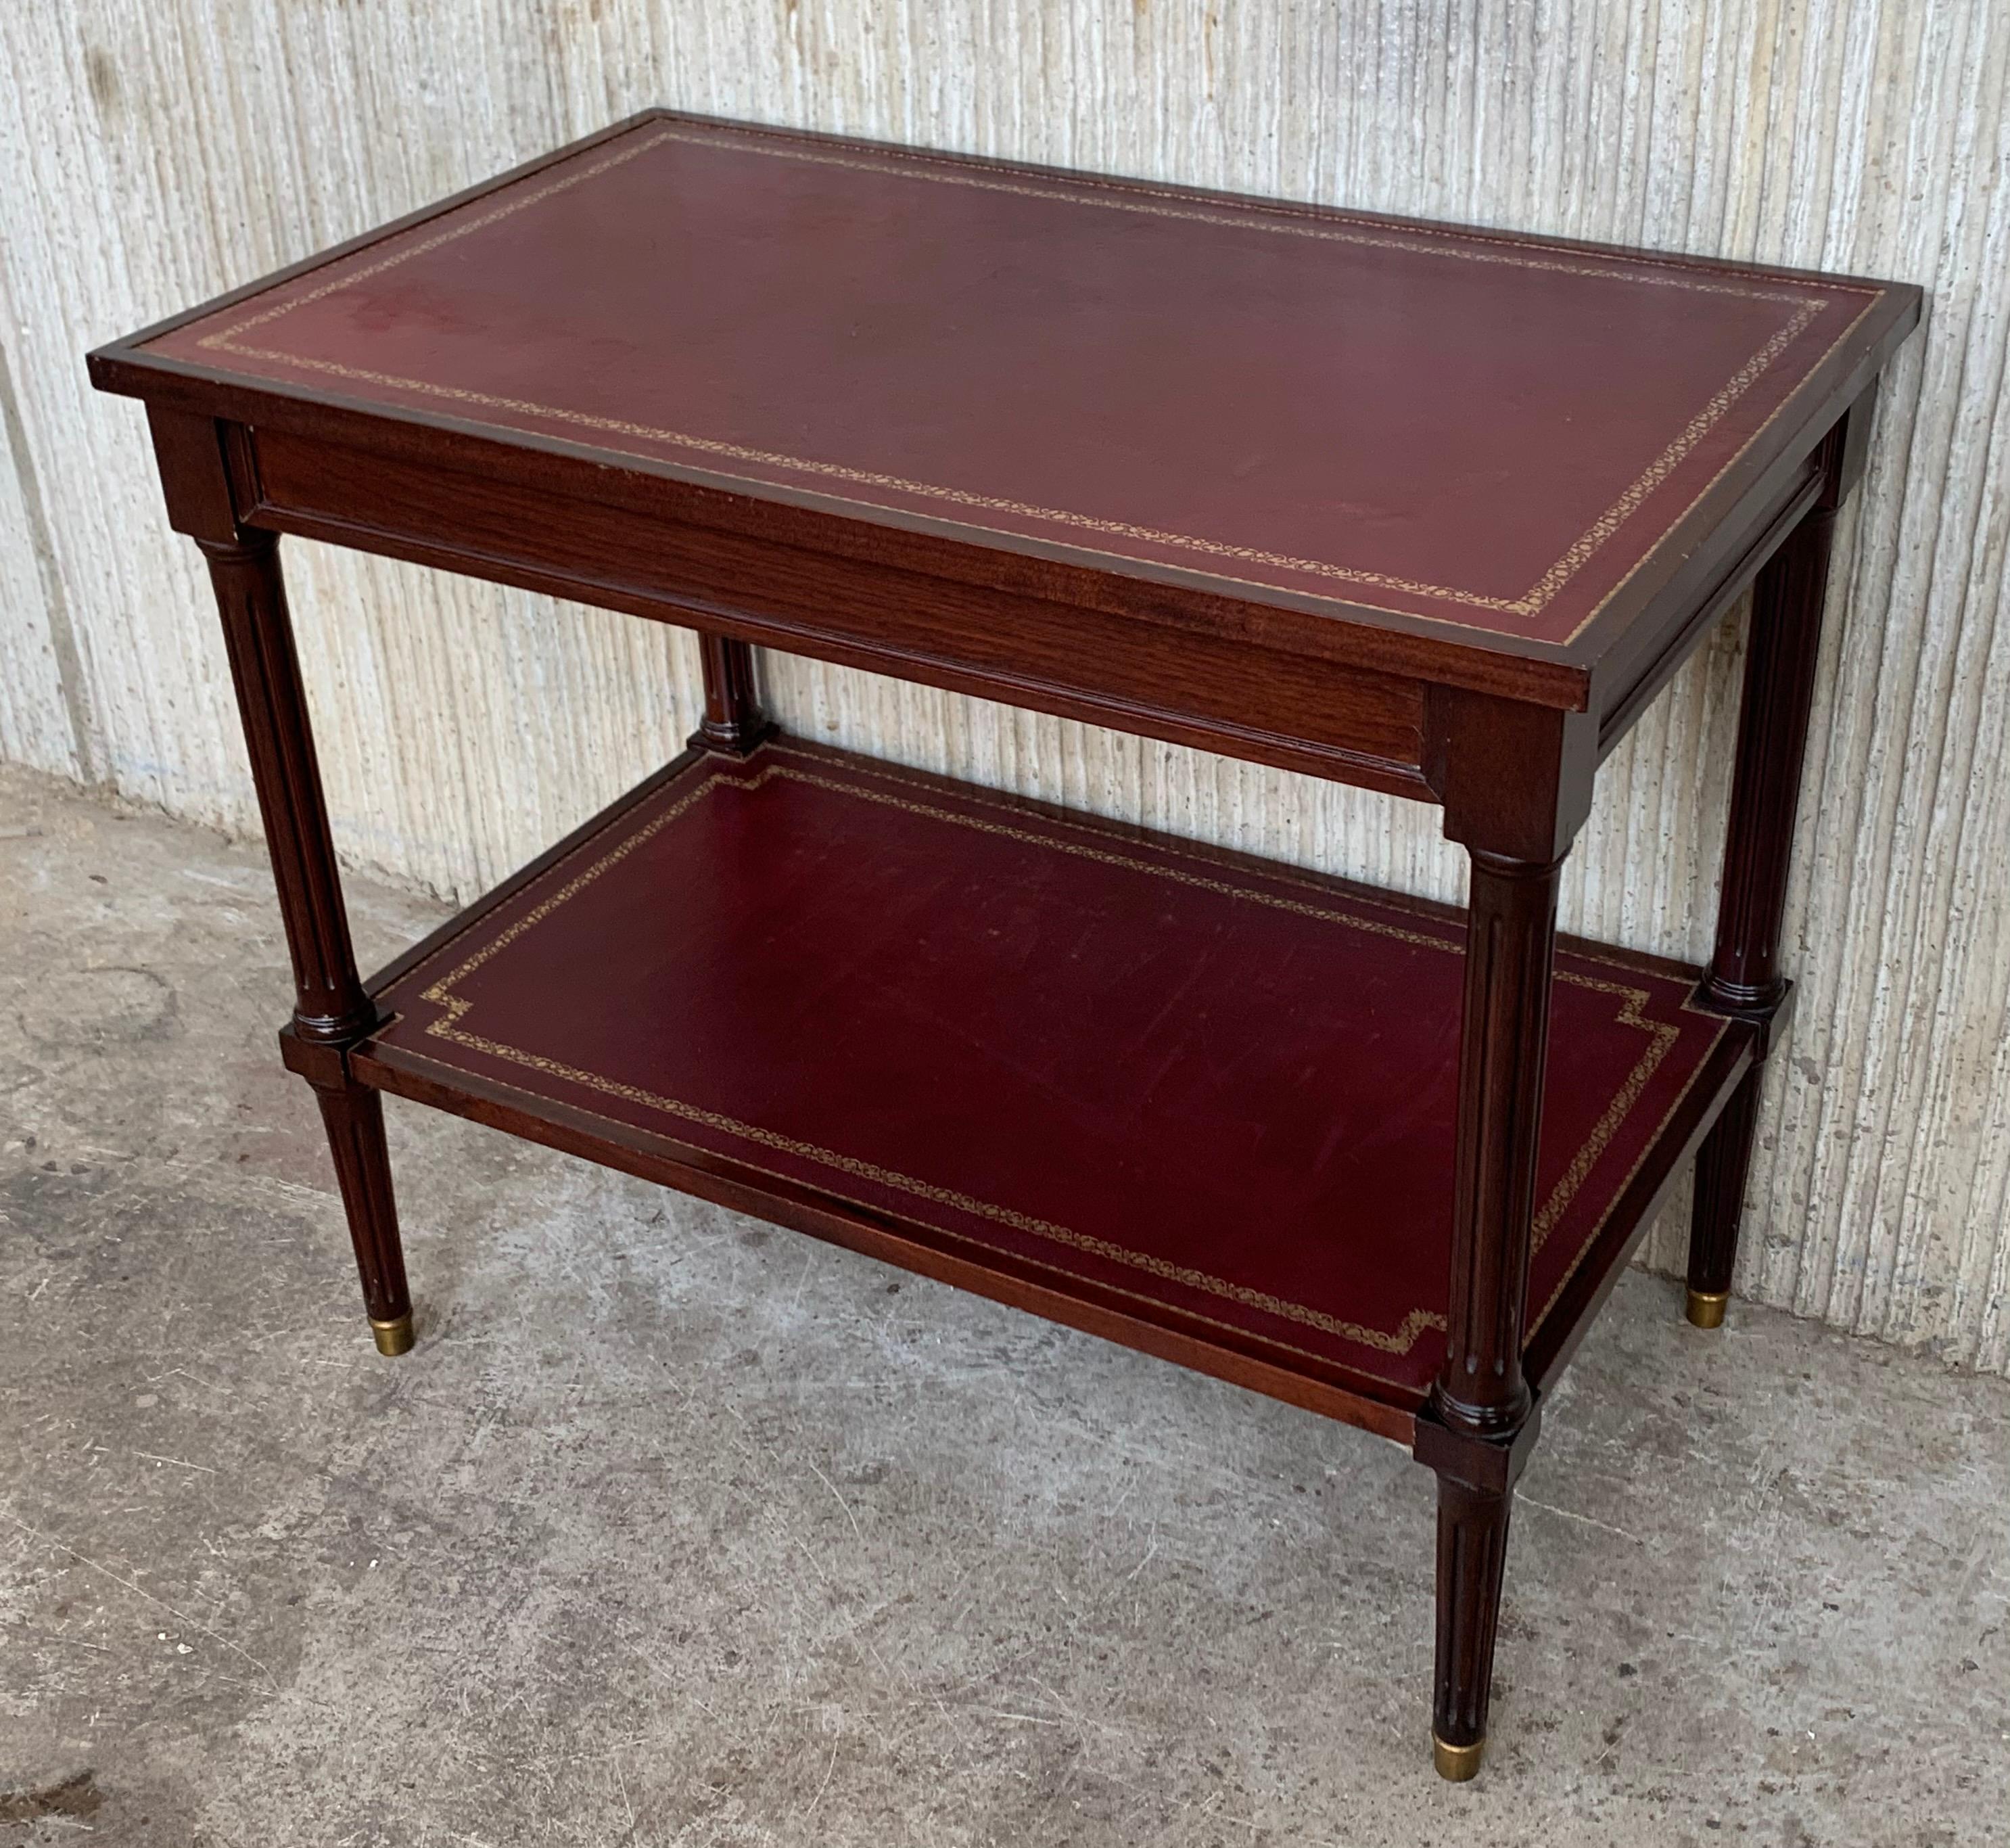 French Two-Tier Red Leather Top Empire Mahogany End Table